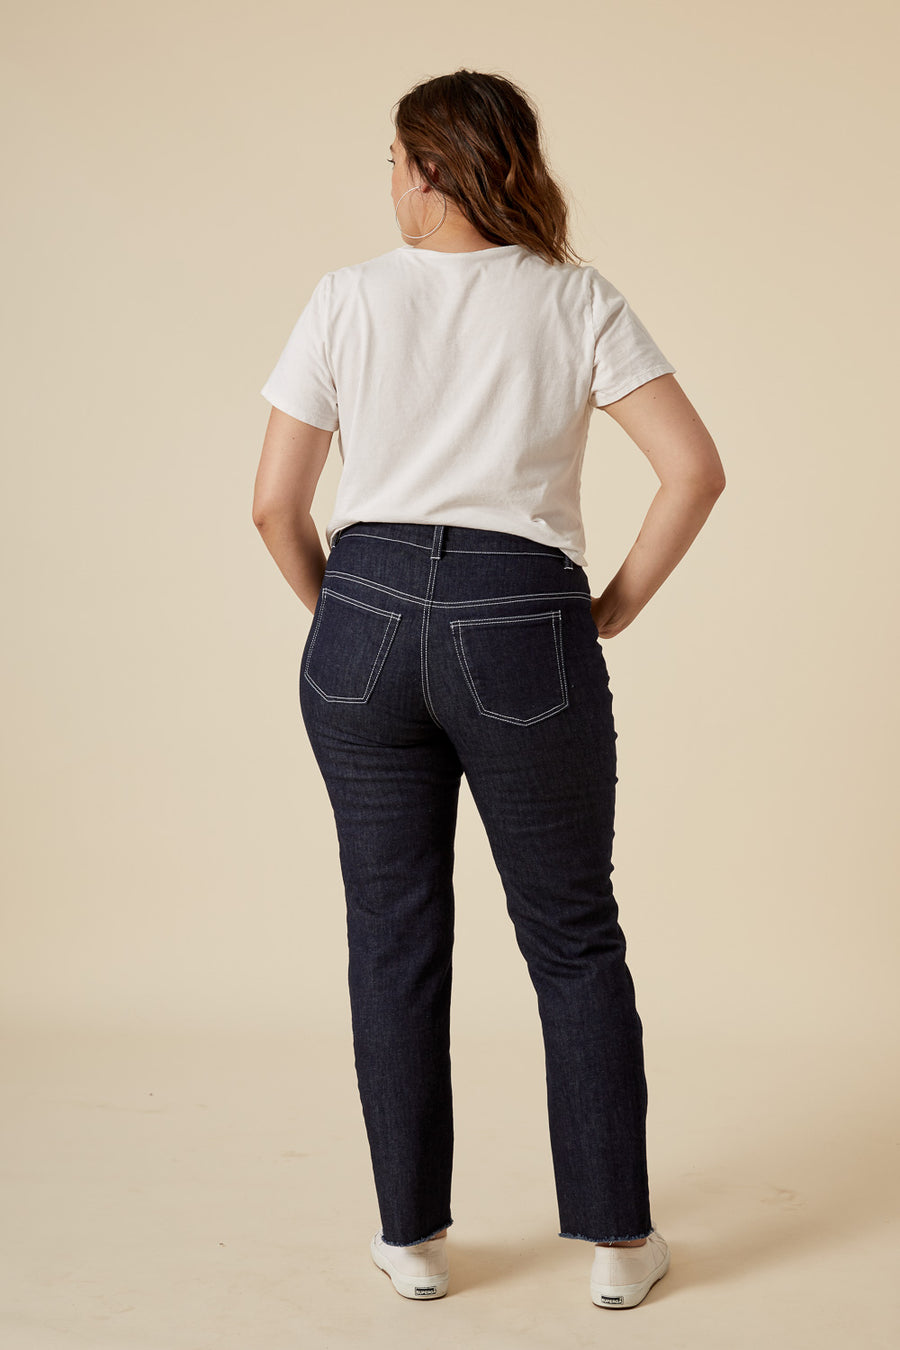 Ginger Jeans pattern | Stretch jeans pattern - straight leg + High waisted |Closet Core Patterns